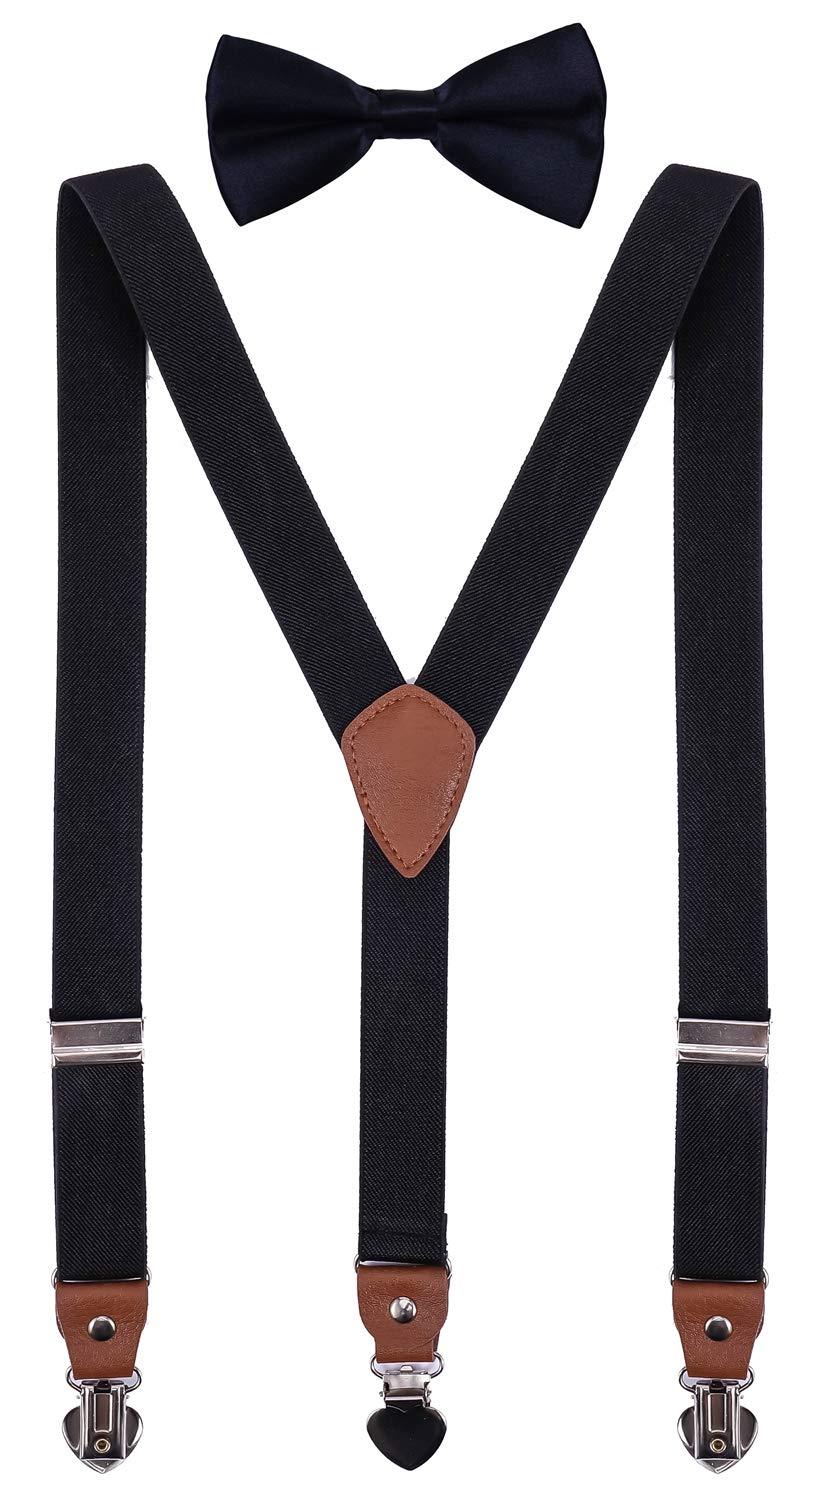 [Australia] - SUNNYTREE Men's Boys' Suspenders Adjustable Y Back with Bow Tie Set for Wedding Party 24 inches (1 yrs - 3 yrs) Black01 